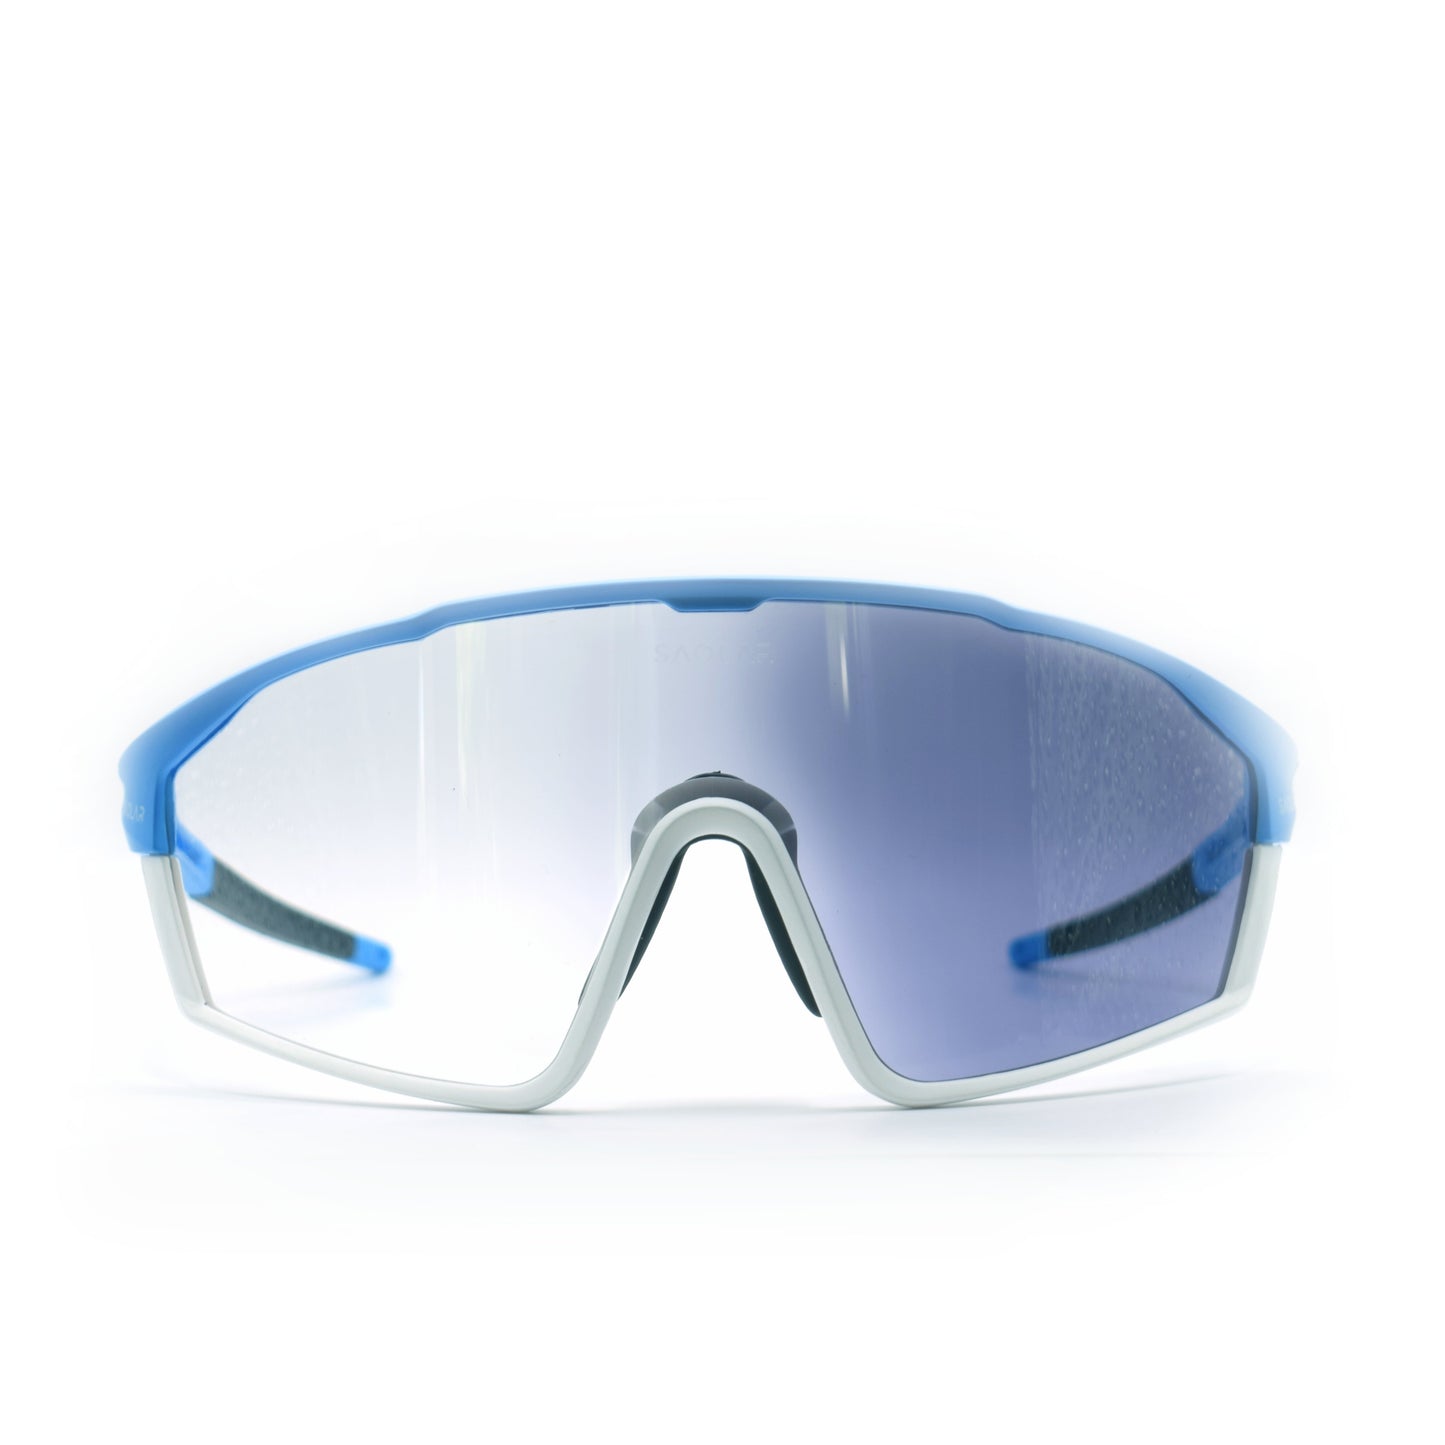 Leviathan Cycling Sunglasses - Front view photochromic